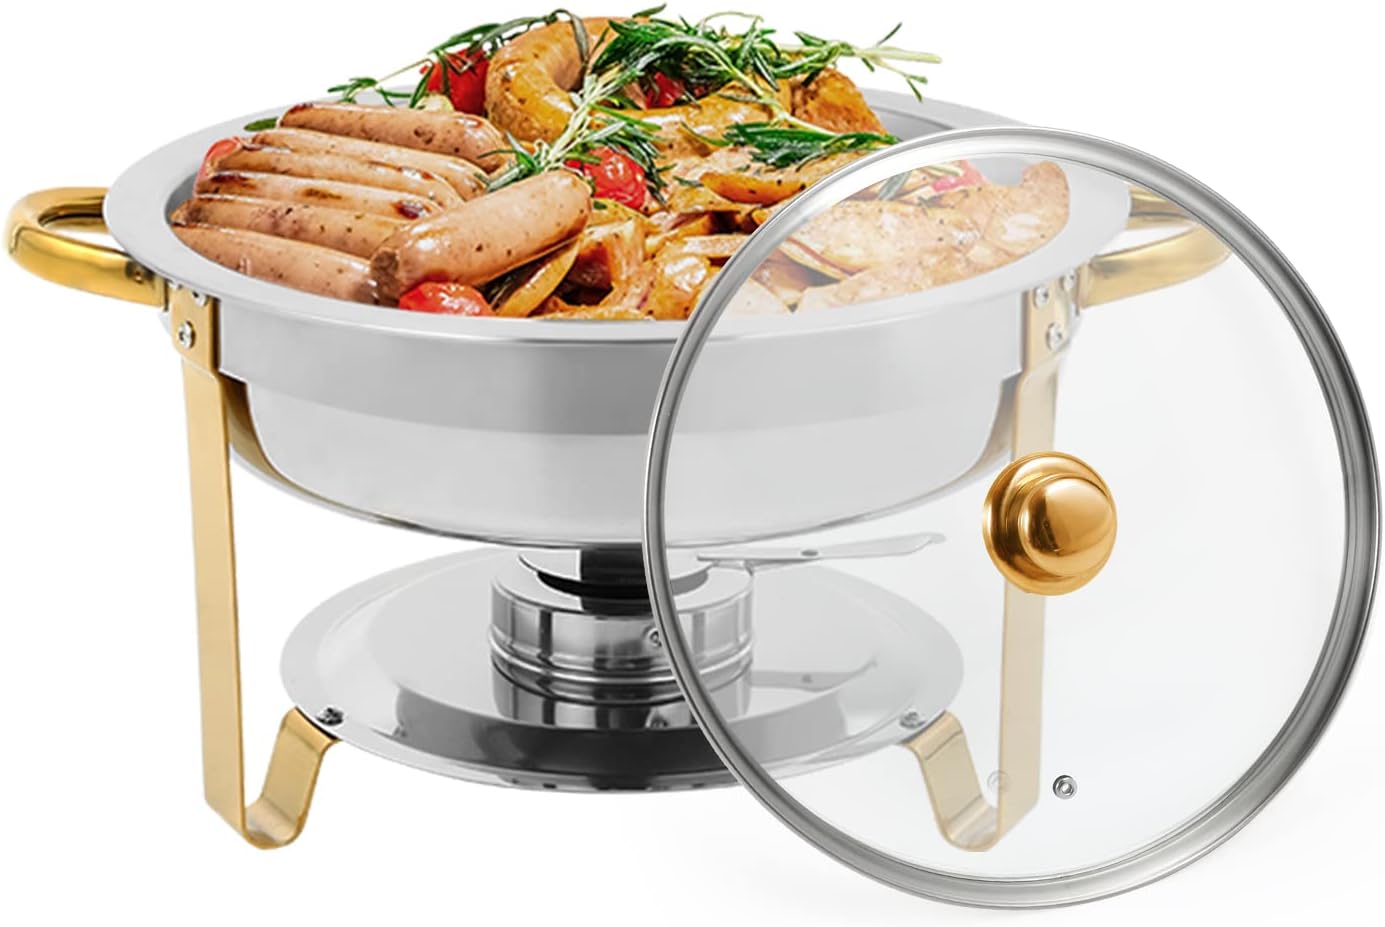 Round 7.5 qt Chafing Dish Buffet Set Includes Water Pan, Food Pan, Fuel Holder, and Stand Food Warmers for Parties by Great Northern Party